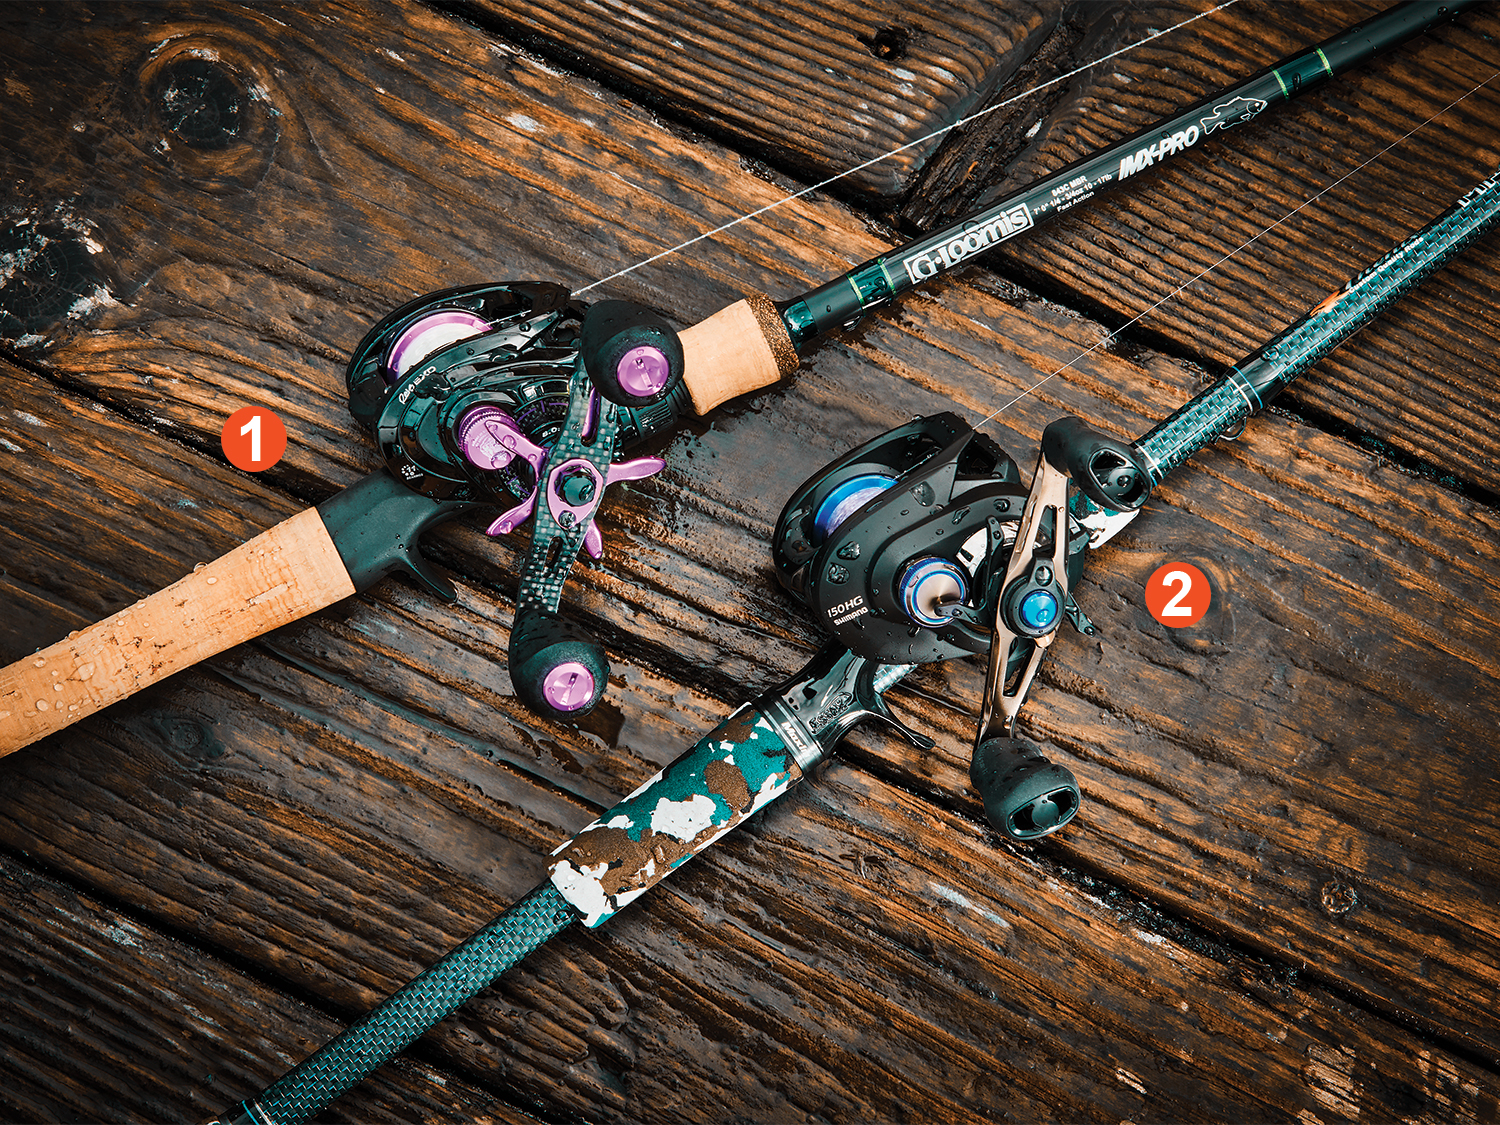 Baitcasting rods and reels on a deck.